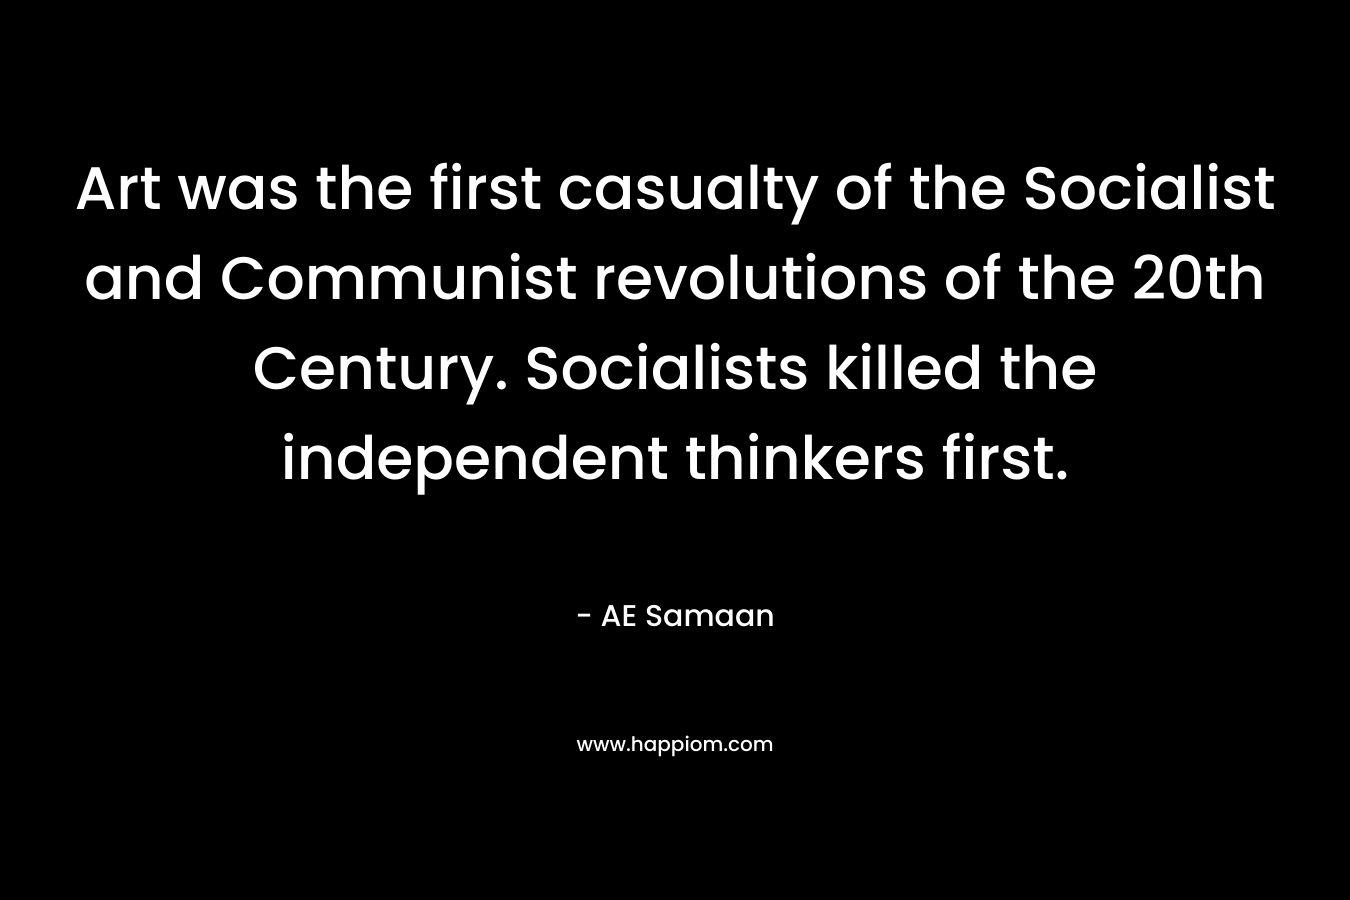 Art was the first casualty of the Socialist and Communist revolutions of the 20th Century. Socialists killed the independent thinkers first.